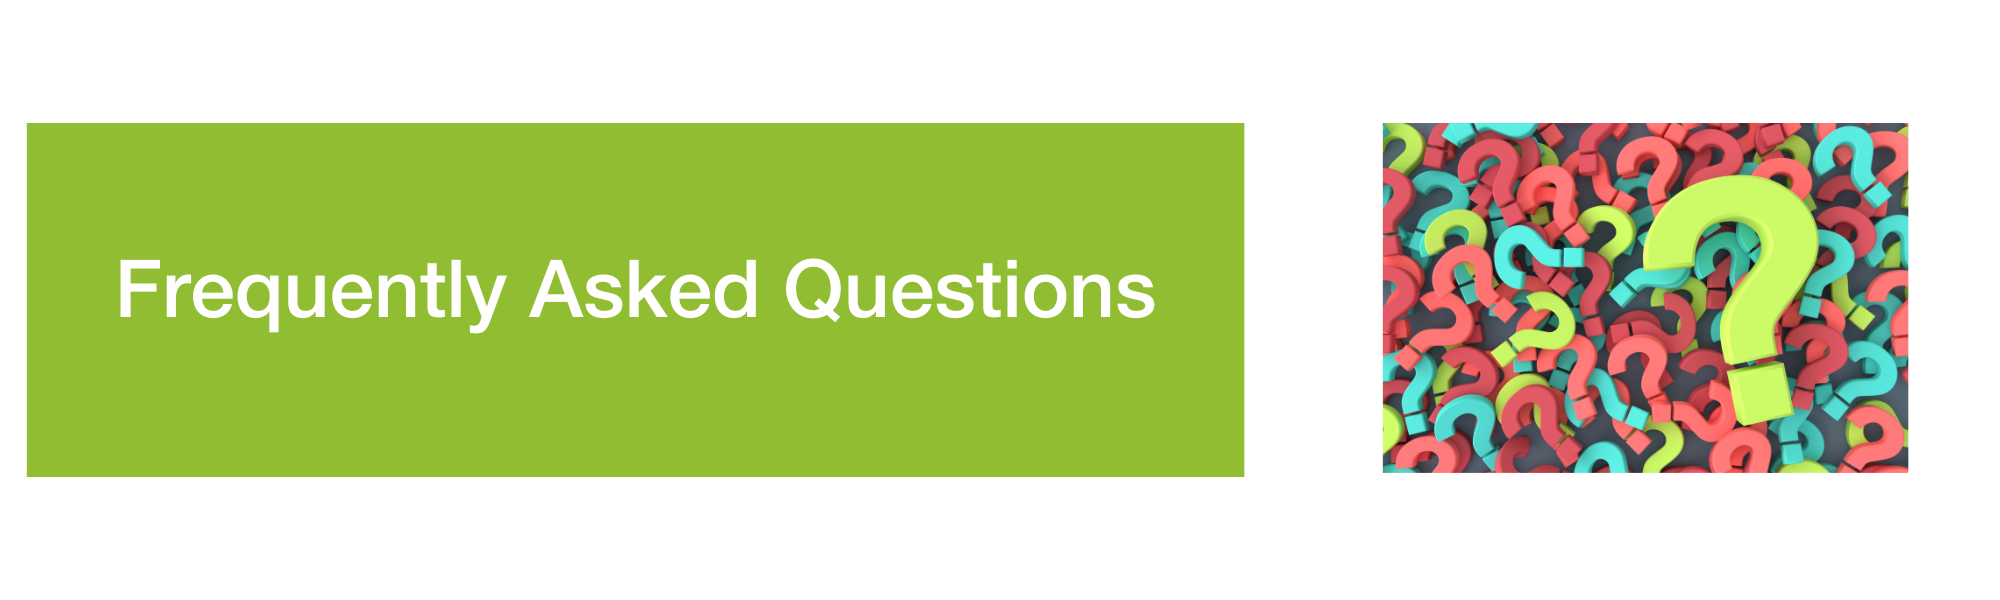 Banners reading, "Frequently Asked Questions" with an image of multicolored question marks